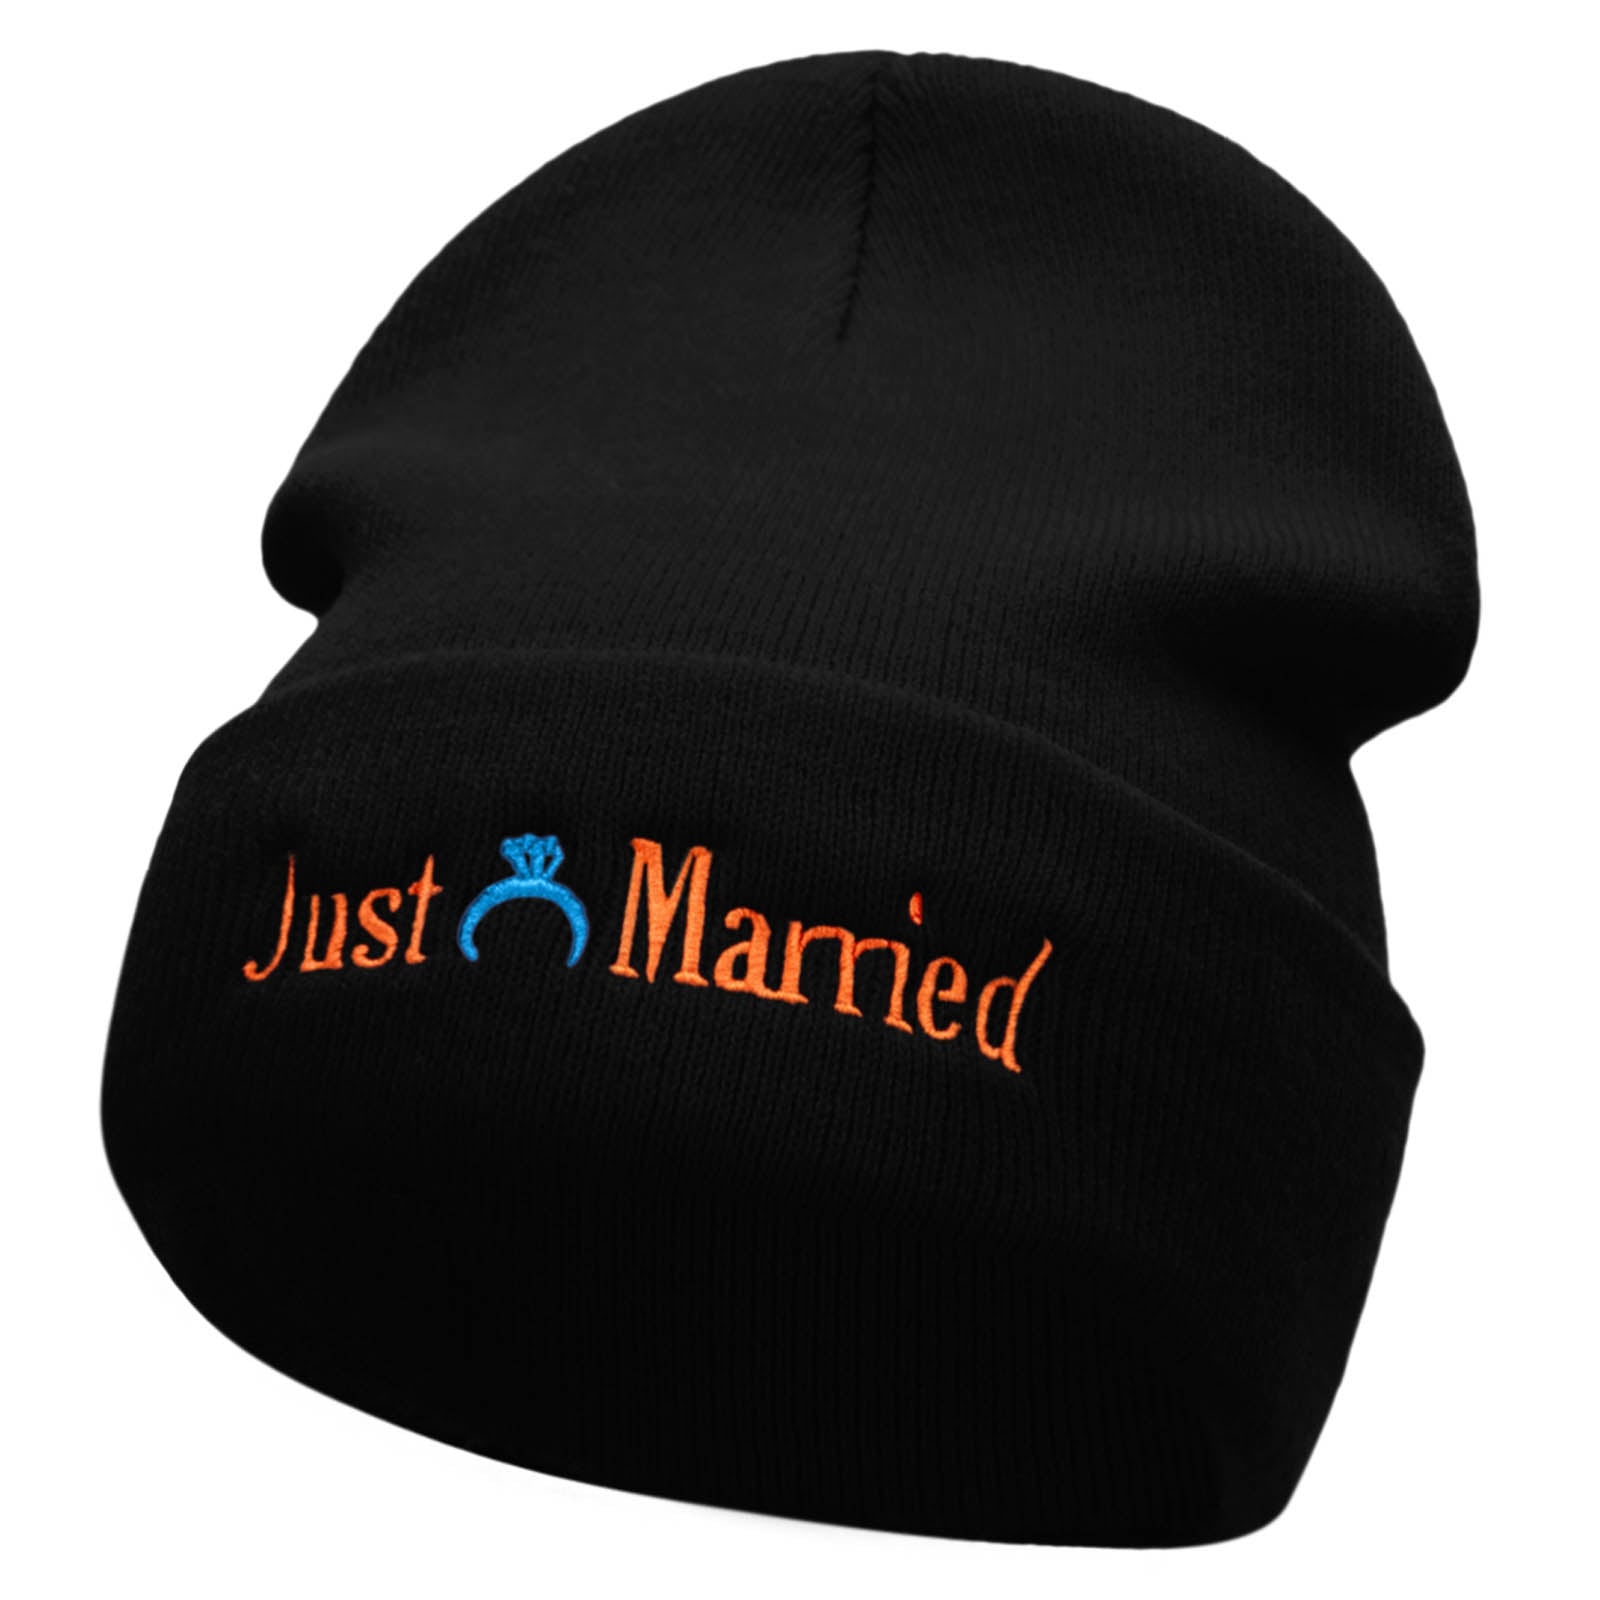 Just Married Ring Embroidered 12 Inch Long Knitted Beanie - Black OSFM